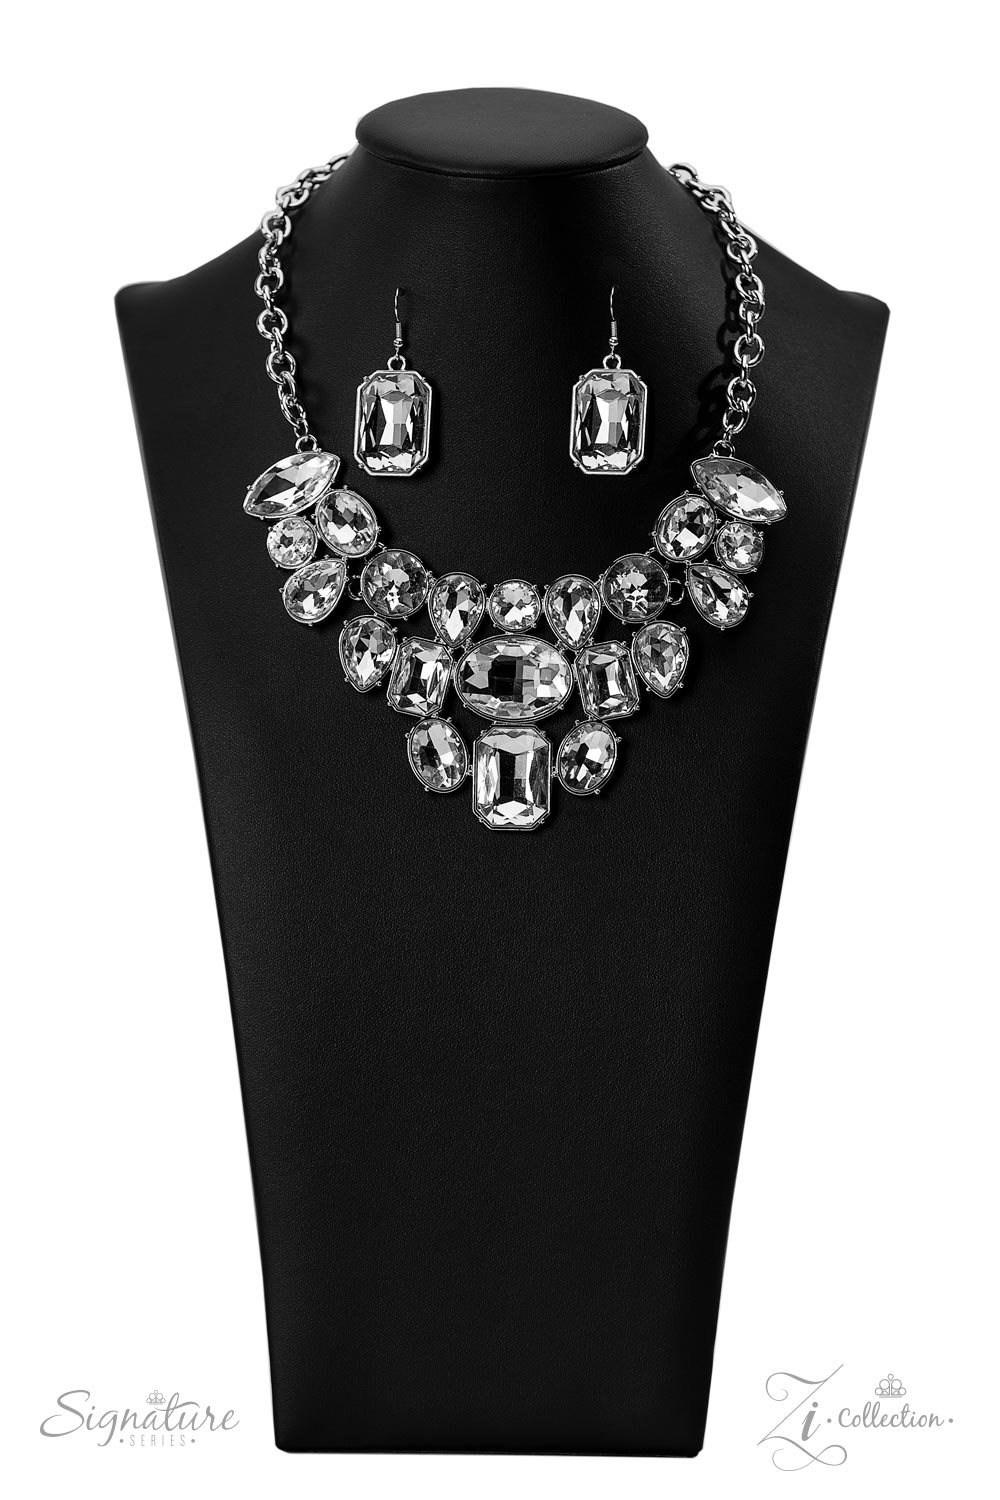 The Tasha Zi Collection Necklace